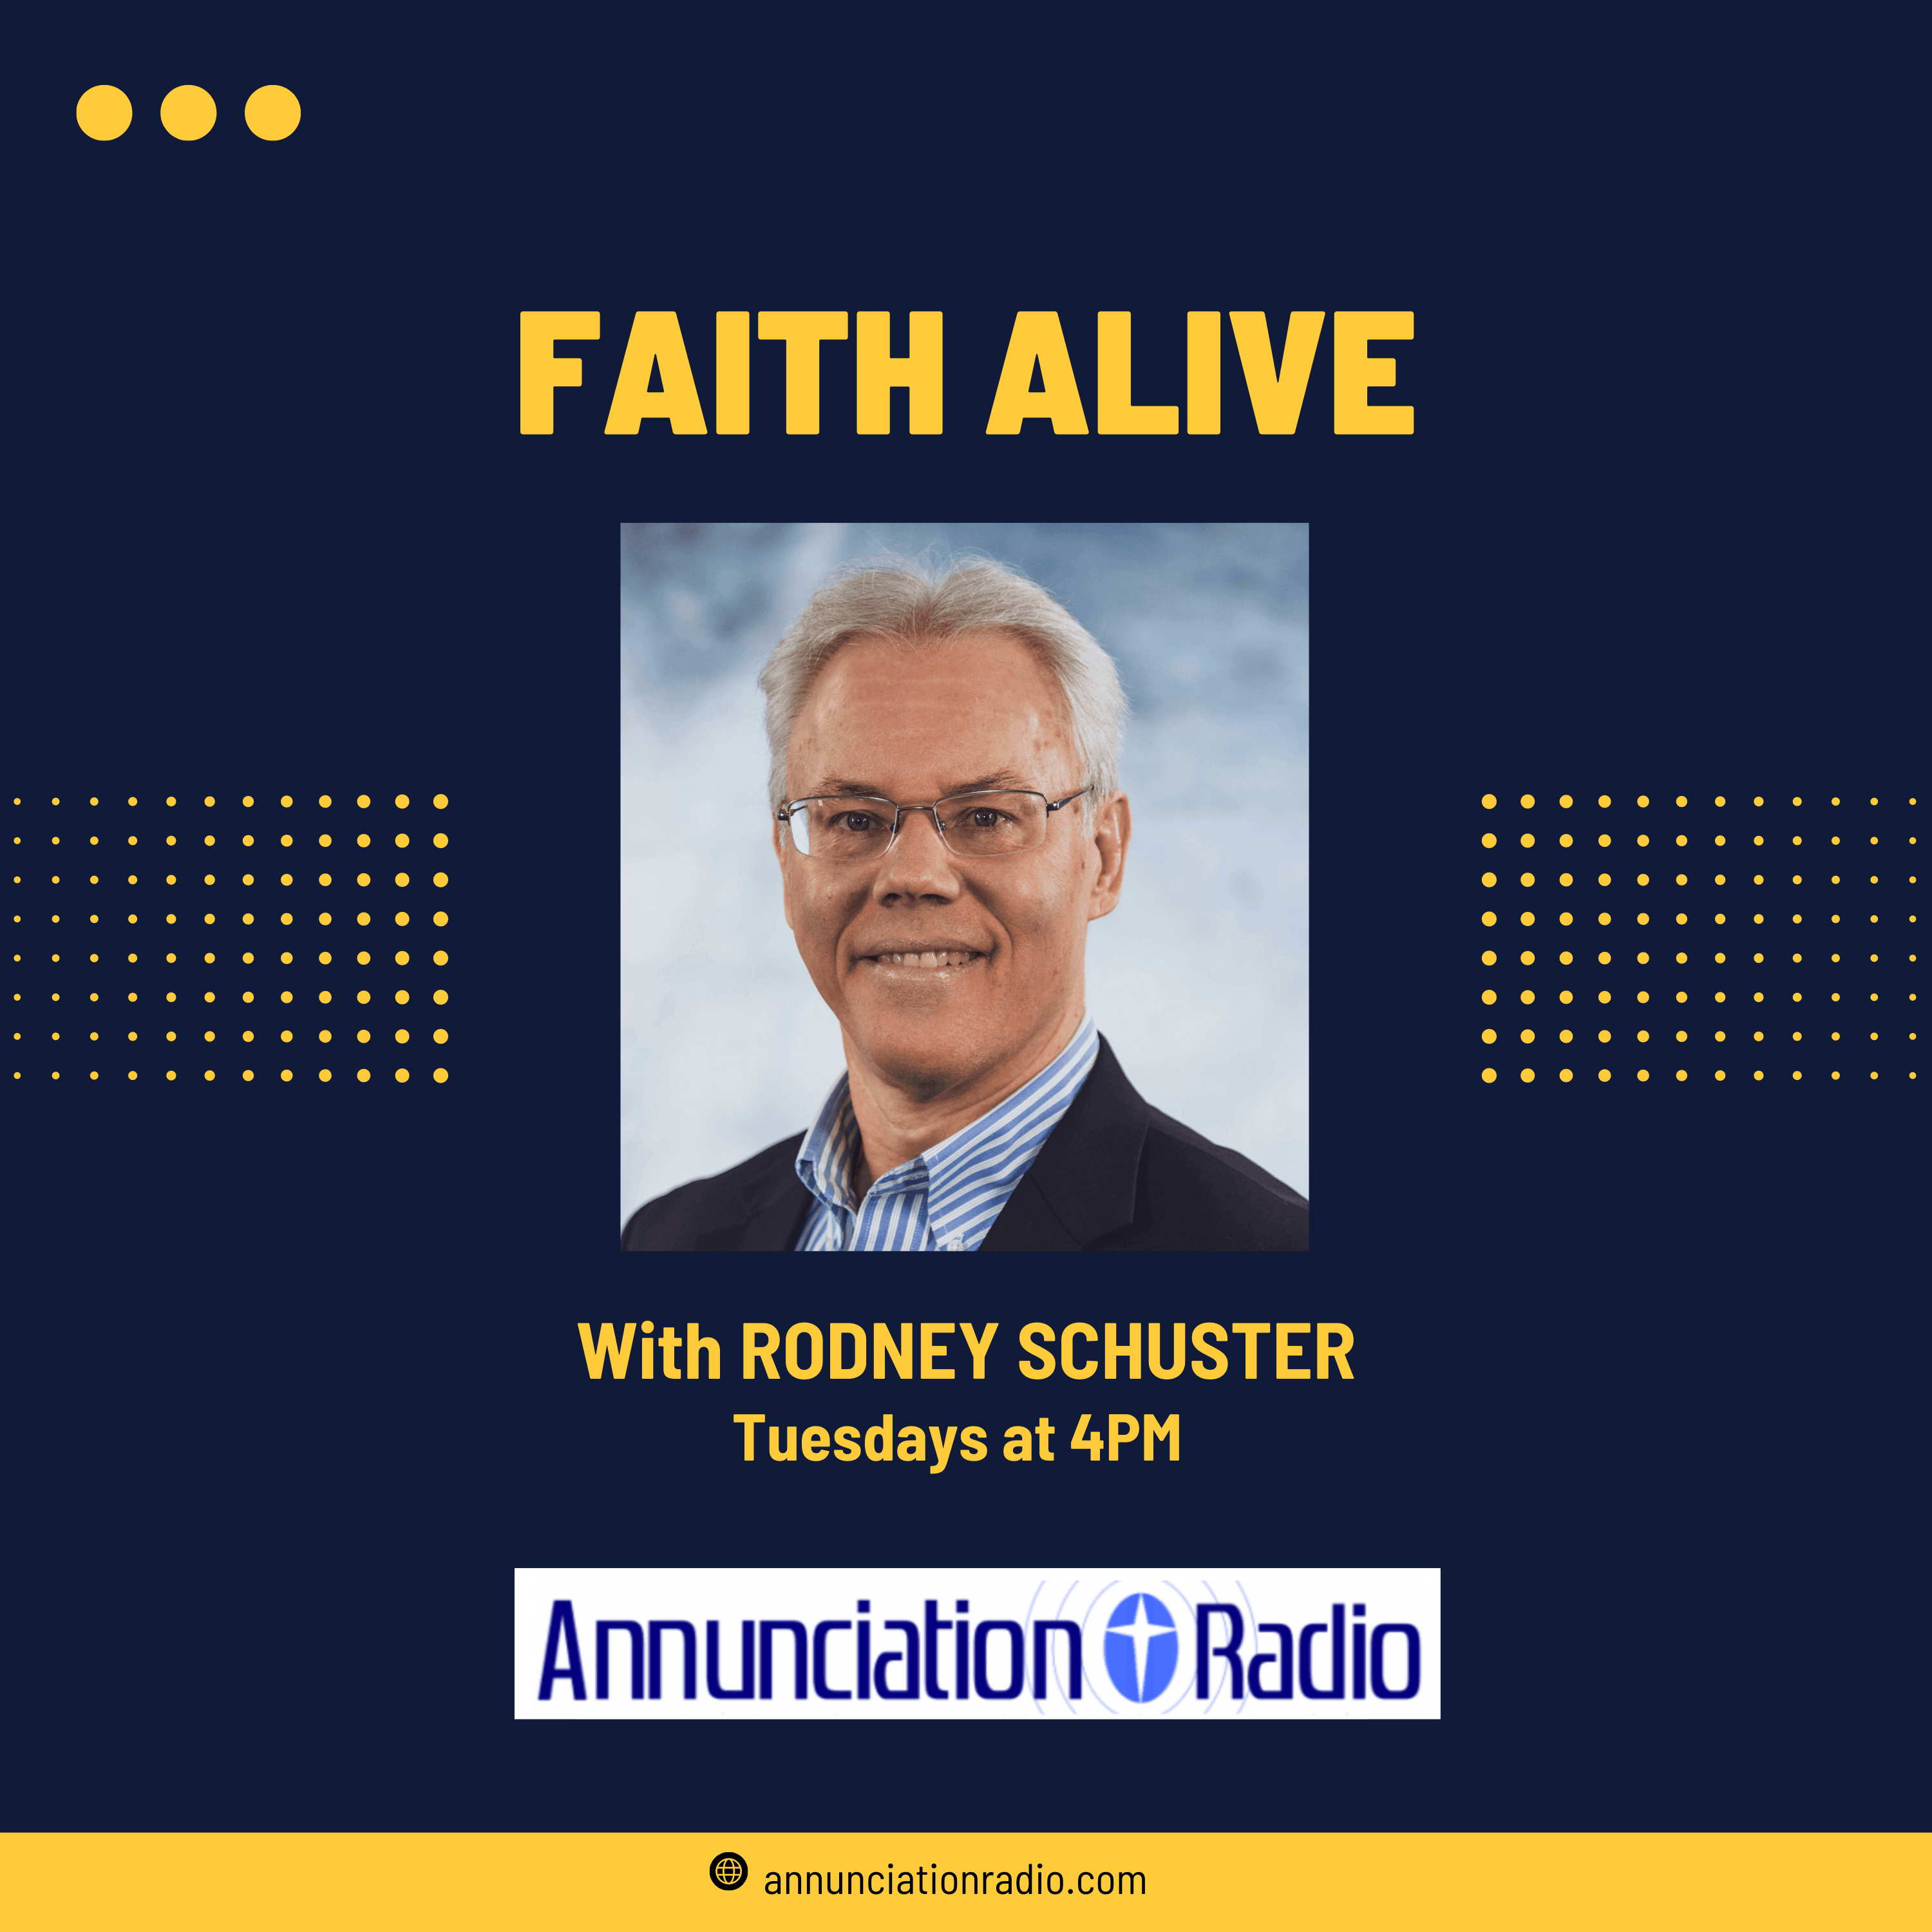 Listen to "Faith Alive" programs on Annunciation Radio's mobile app or the website https://www.annunciationradio.com/faith-alive